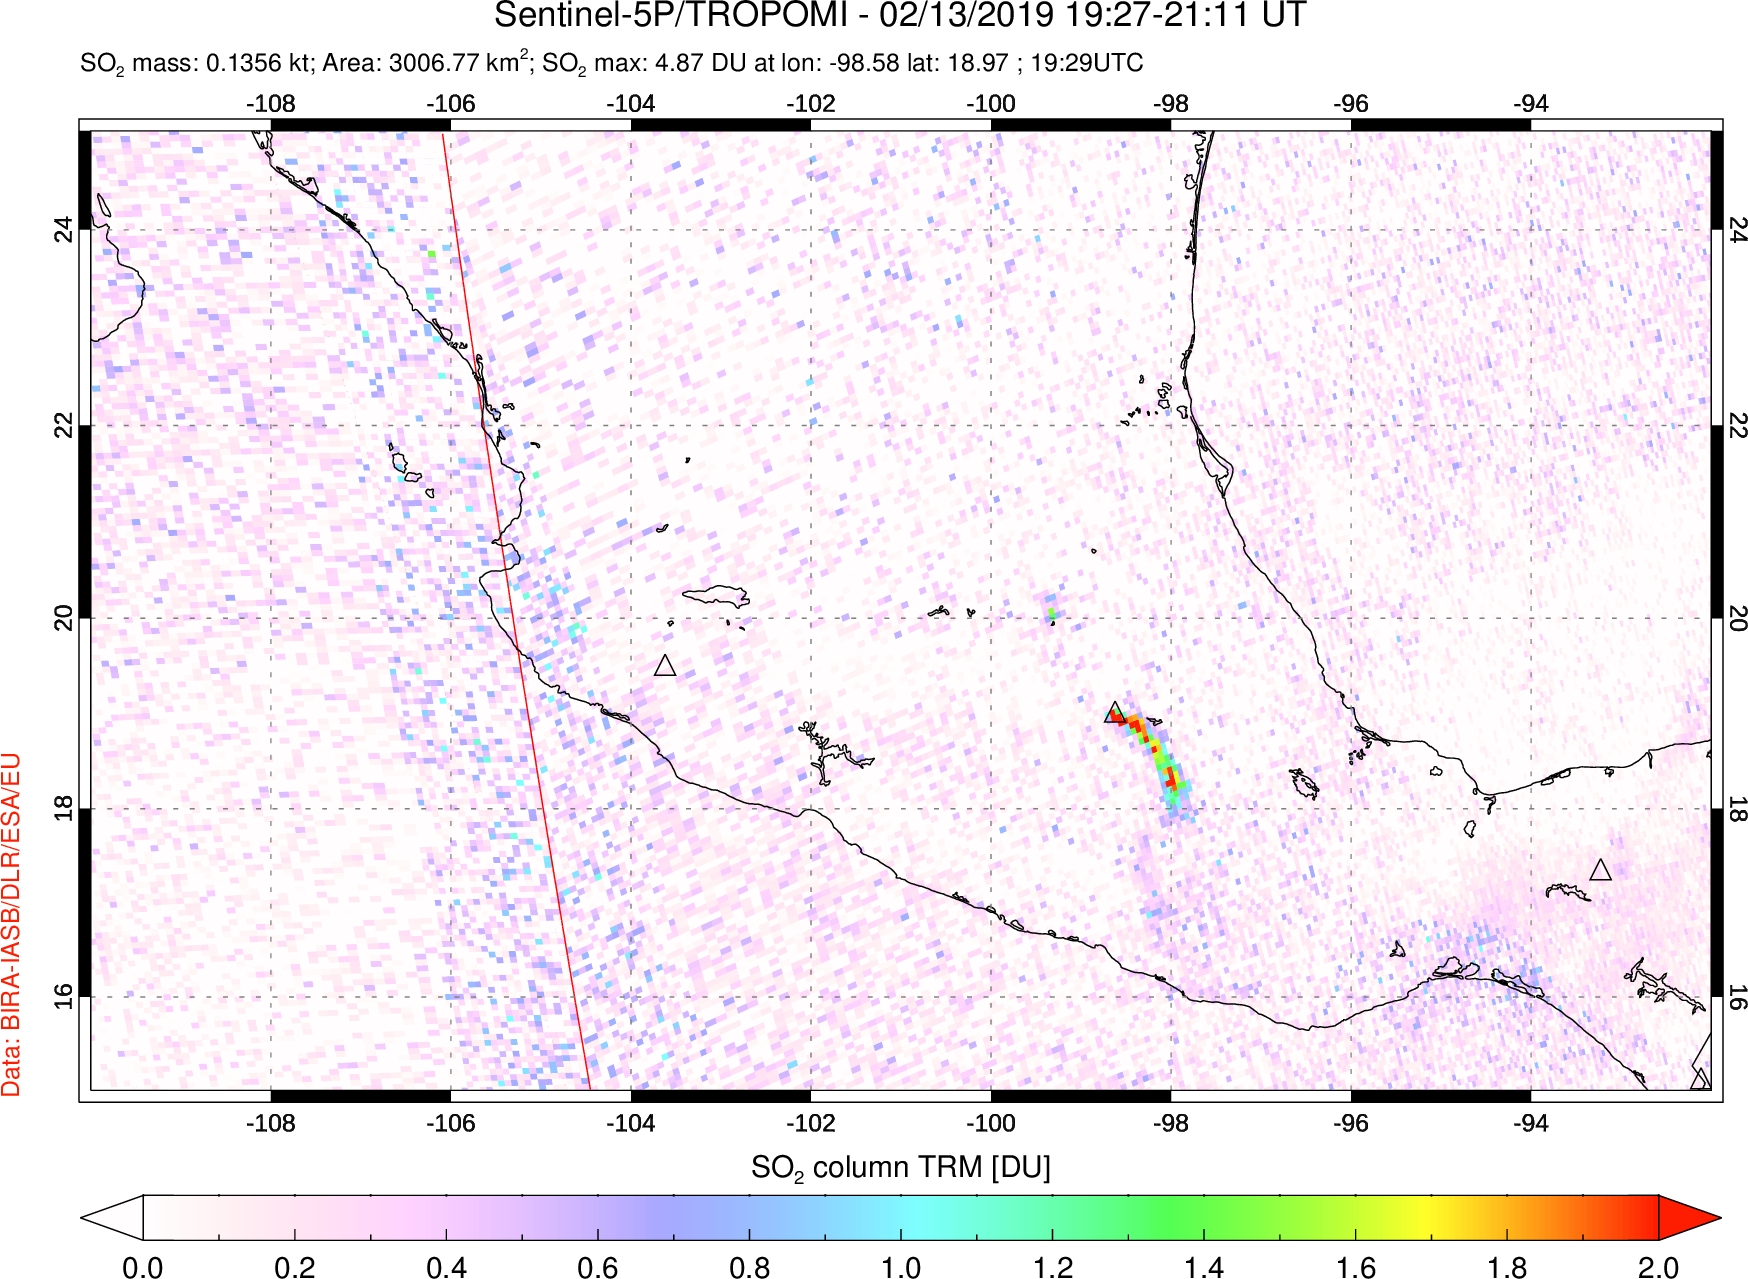 A sulfur dioxide image over Mexico on Feb 13, 2019.